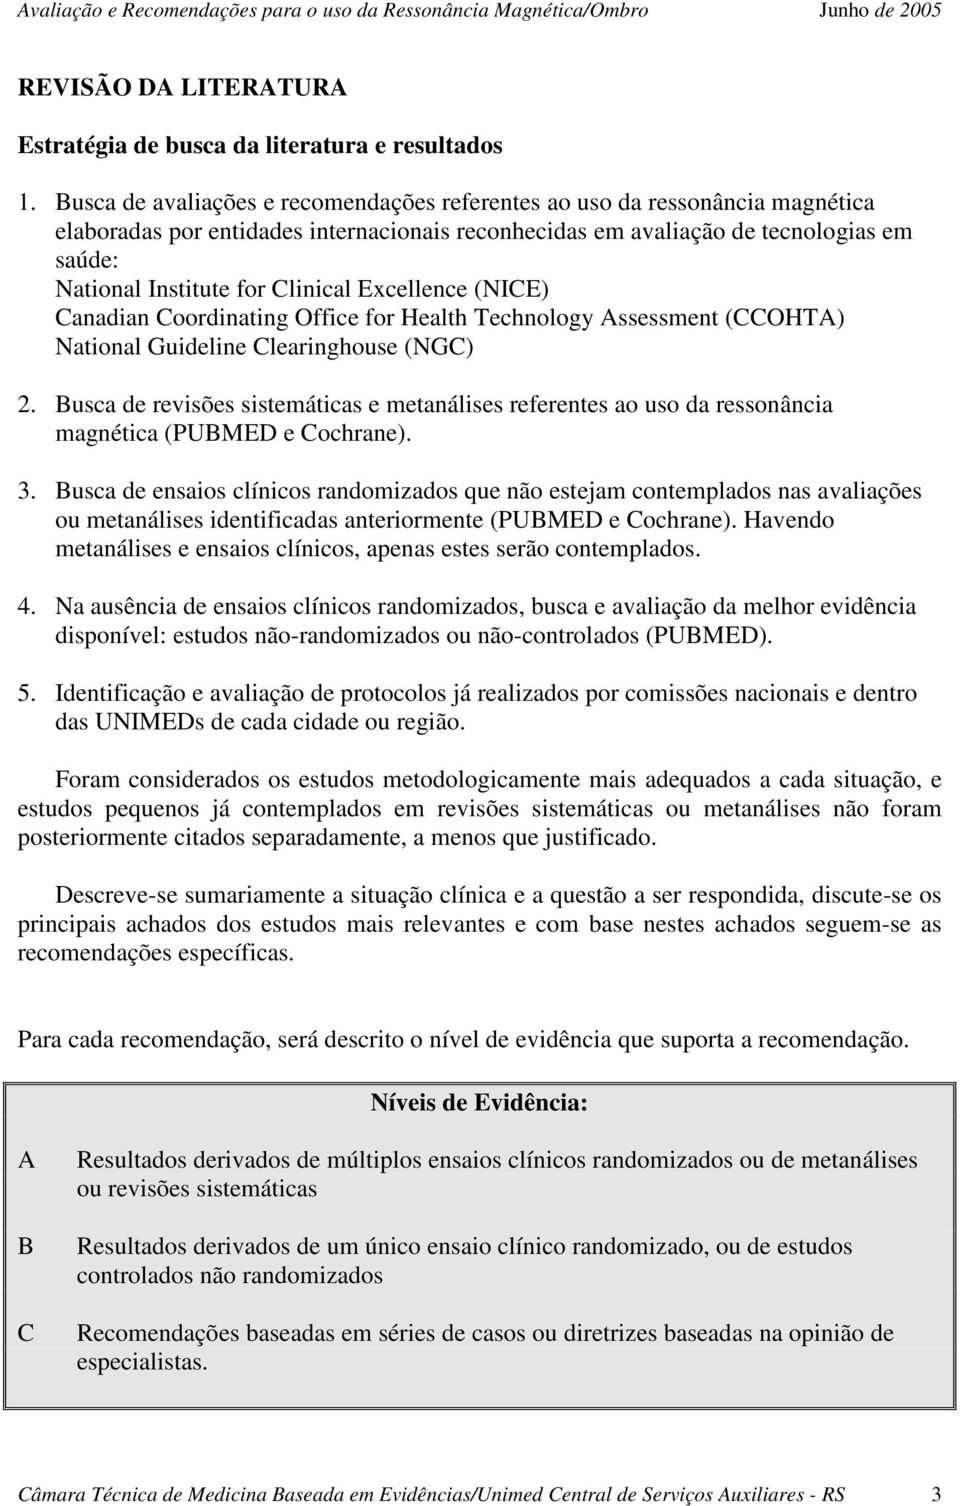 Clinical Excellence (NICE) Canadian Coordinating Office for Health Technology Assessment (CCOHTA) National Guideline Clearinghouse (NGC) 2.